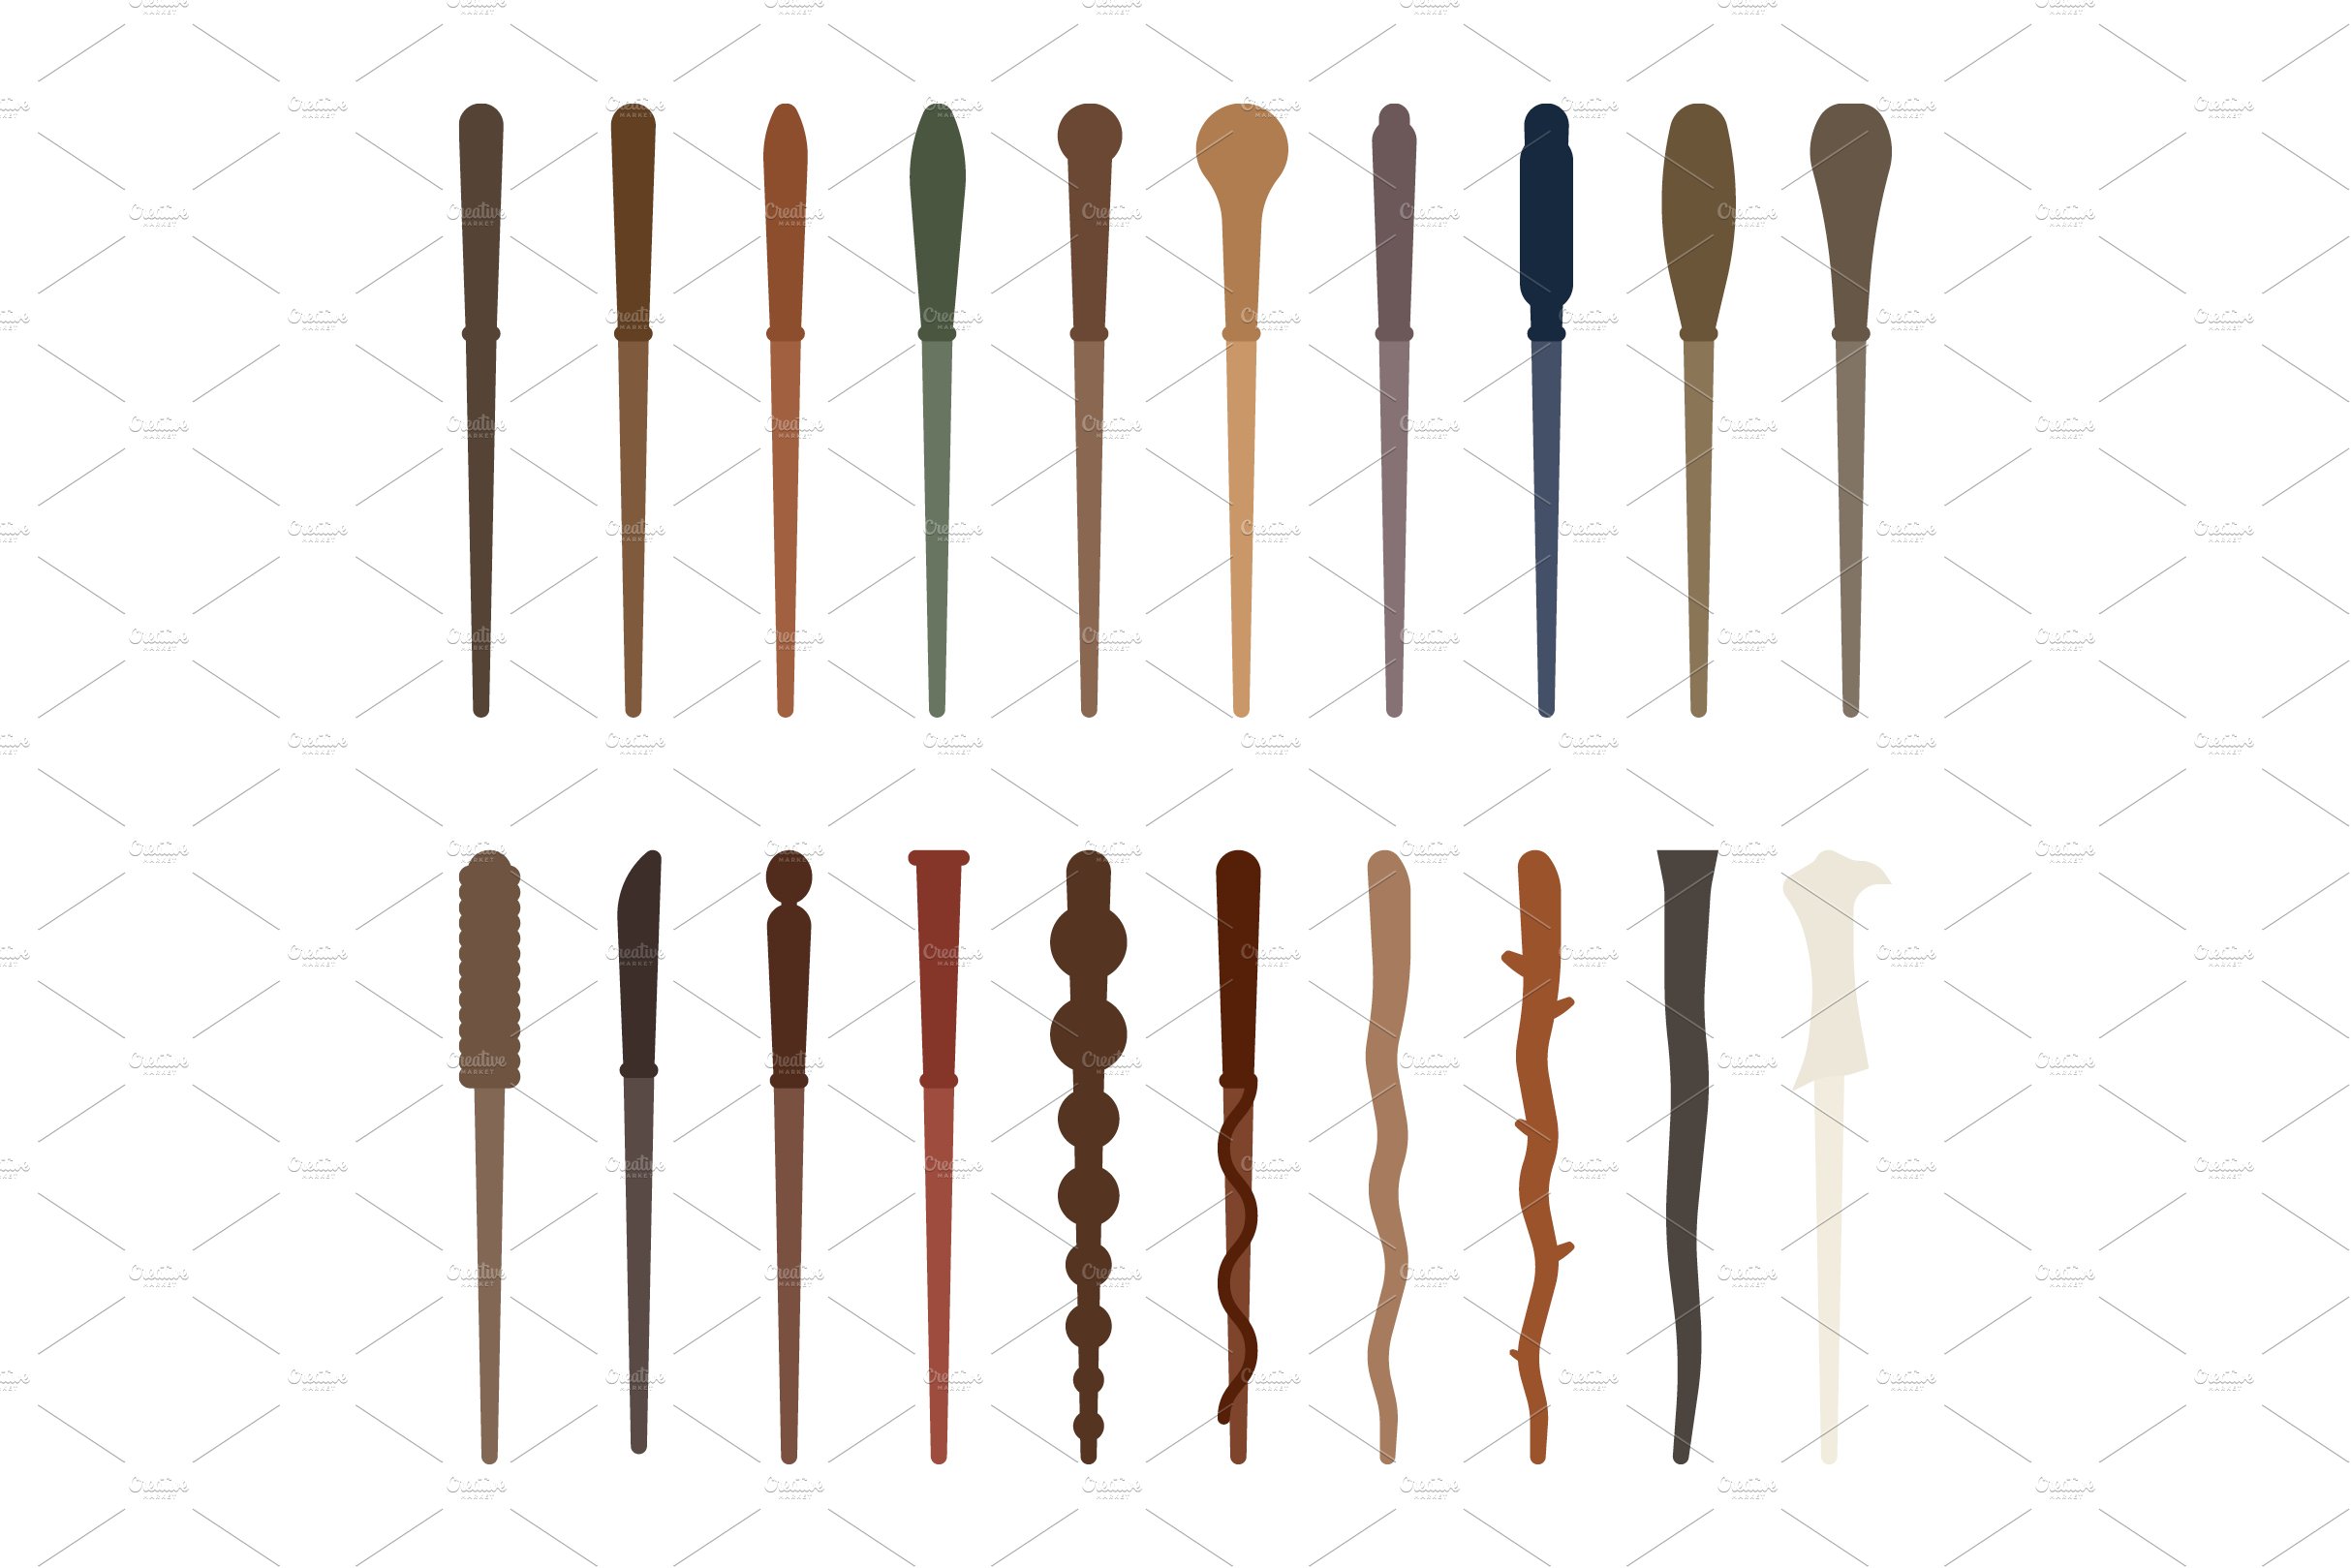 Magic Wands preview image.